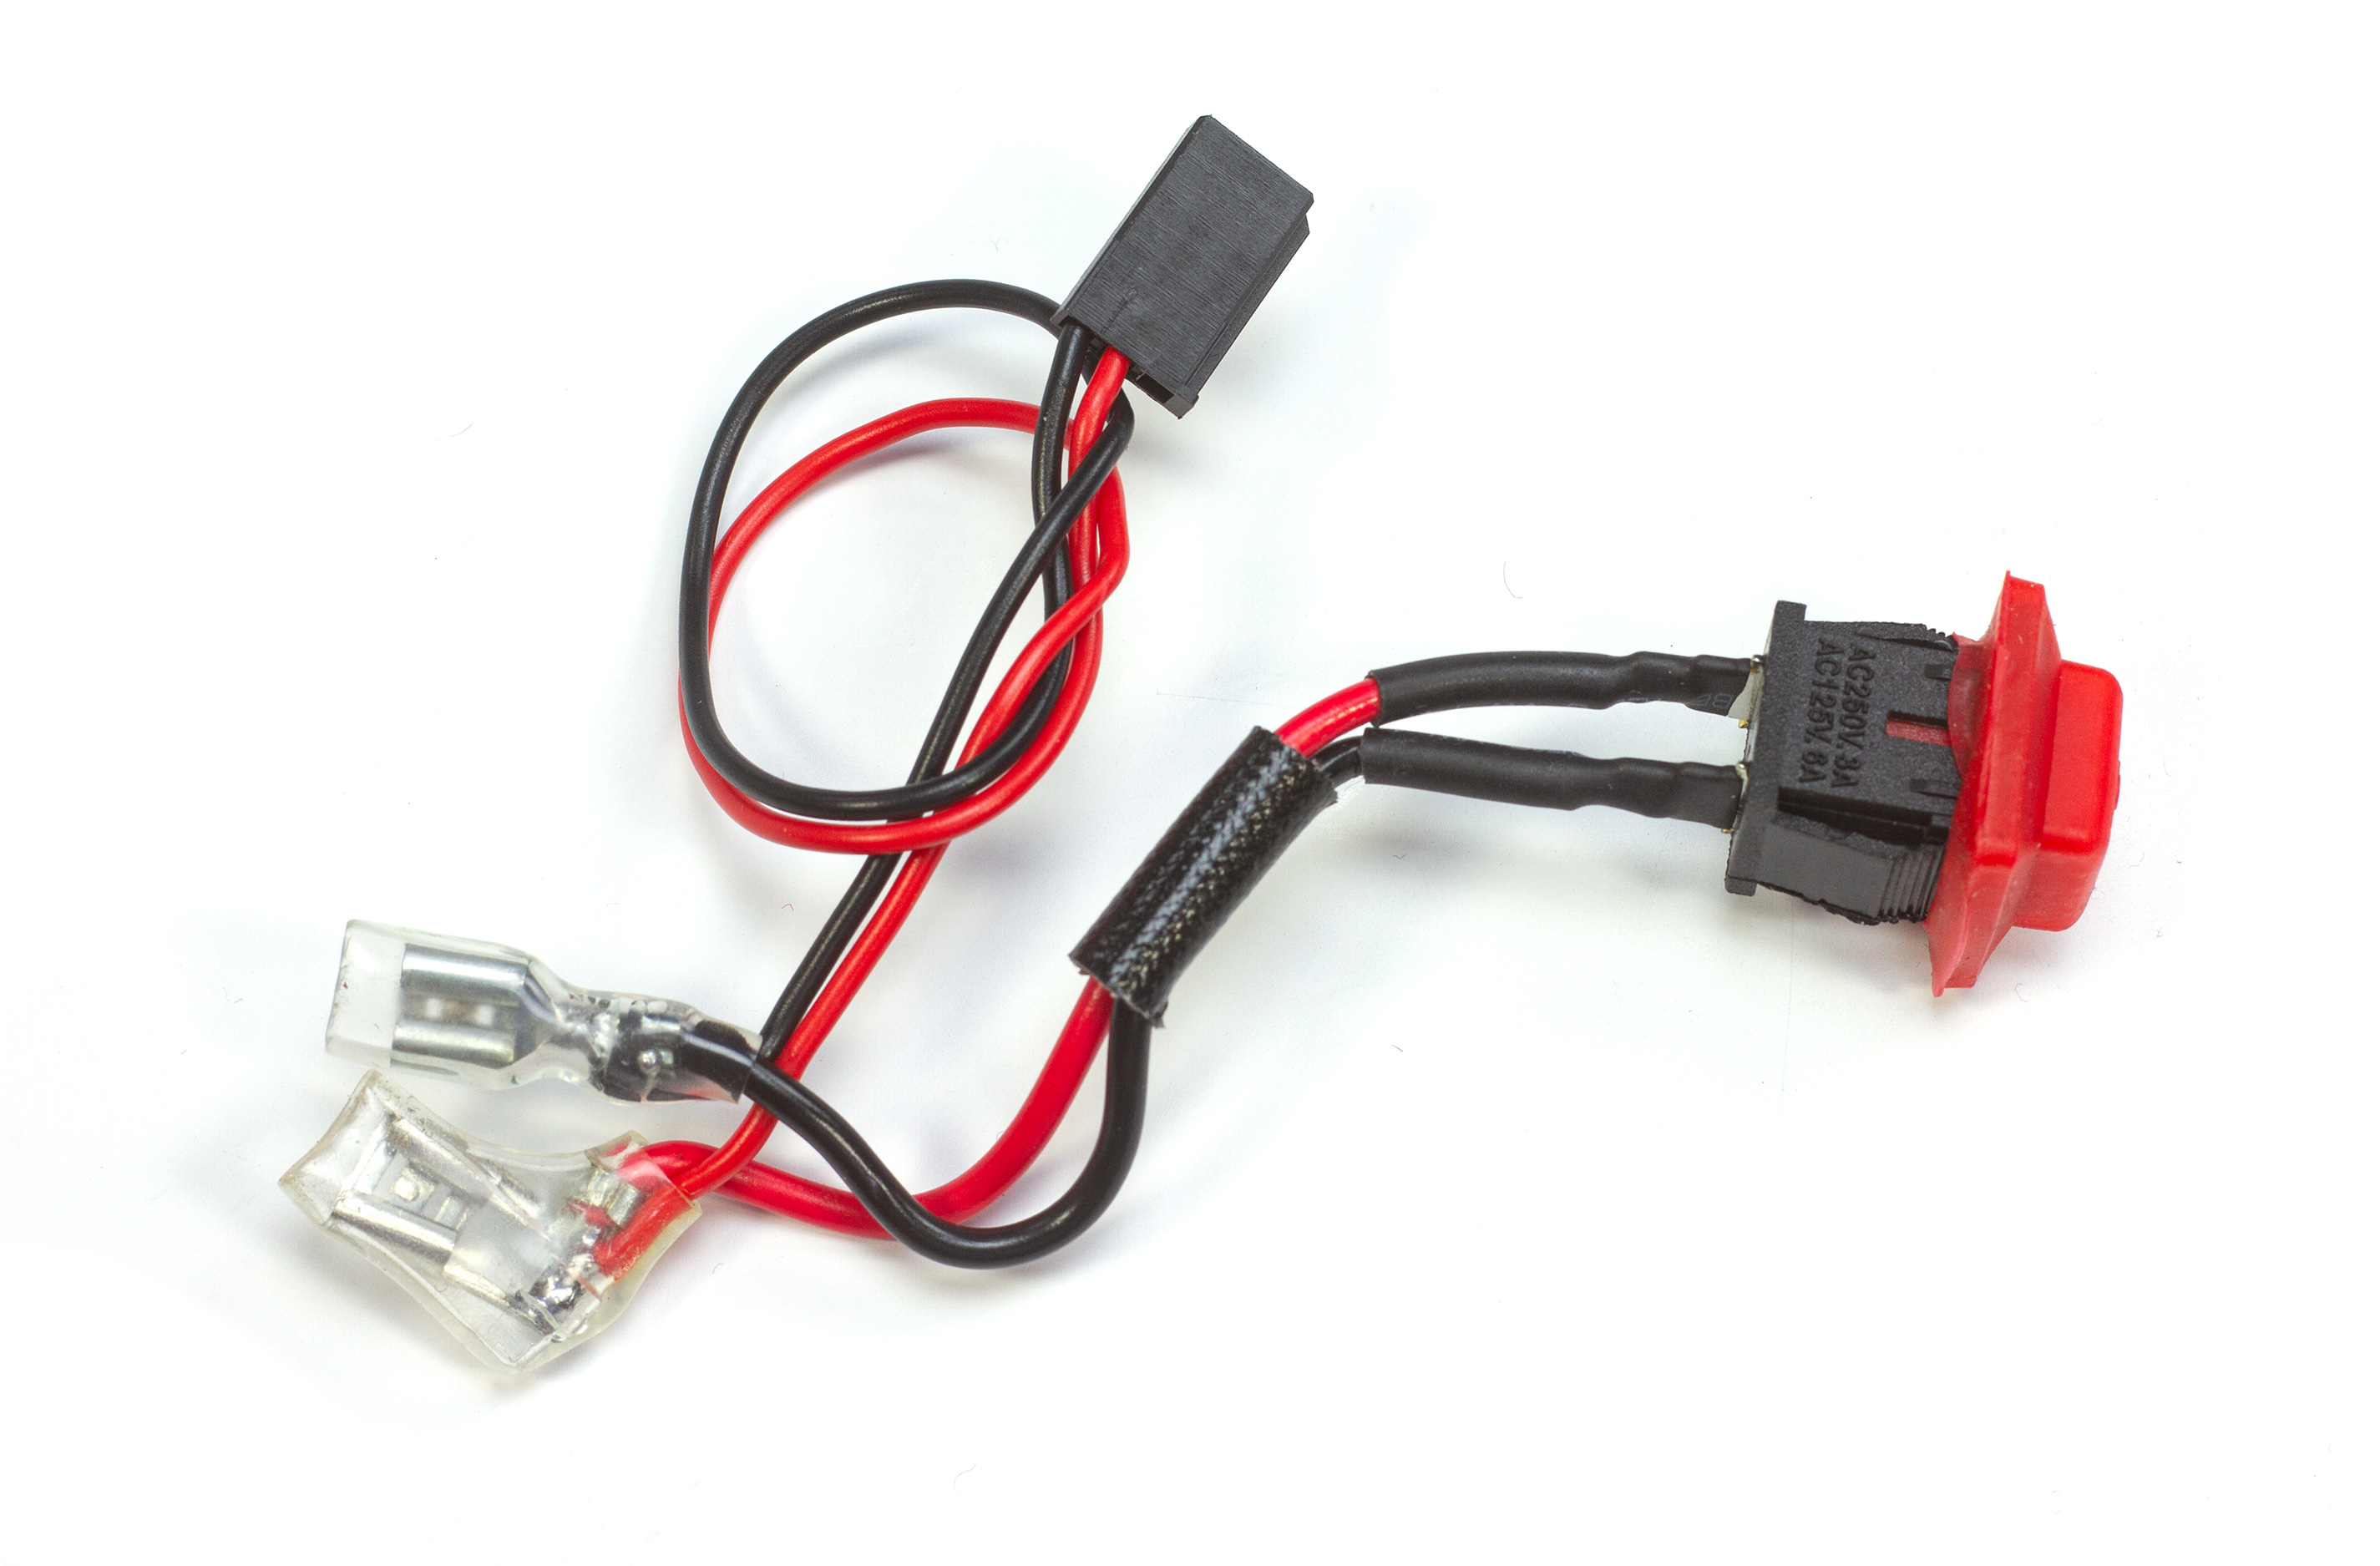 M005 Carson Engine kill switch with Fail save connector for Wild GP Attack